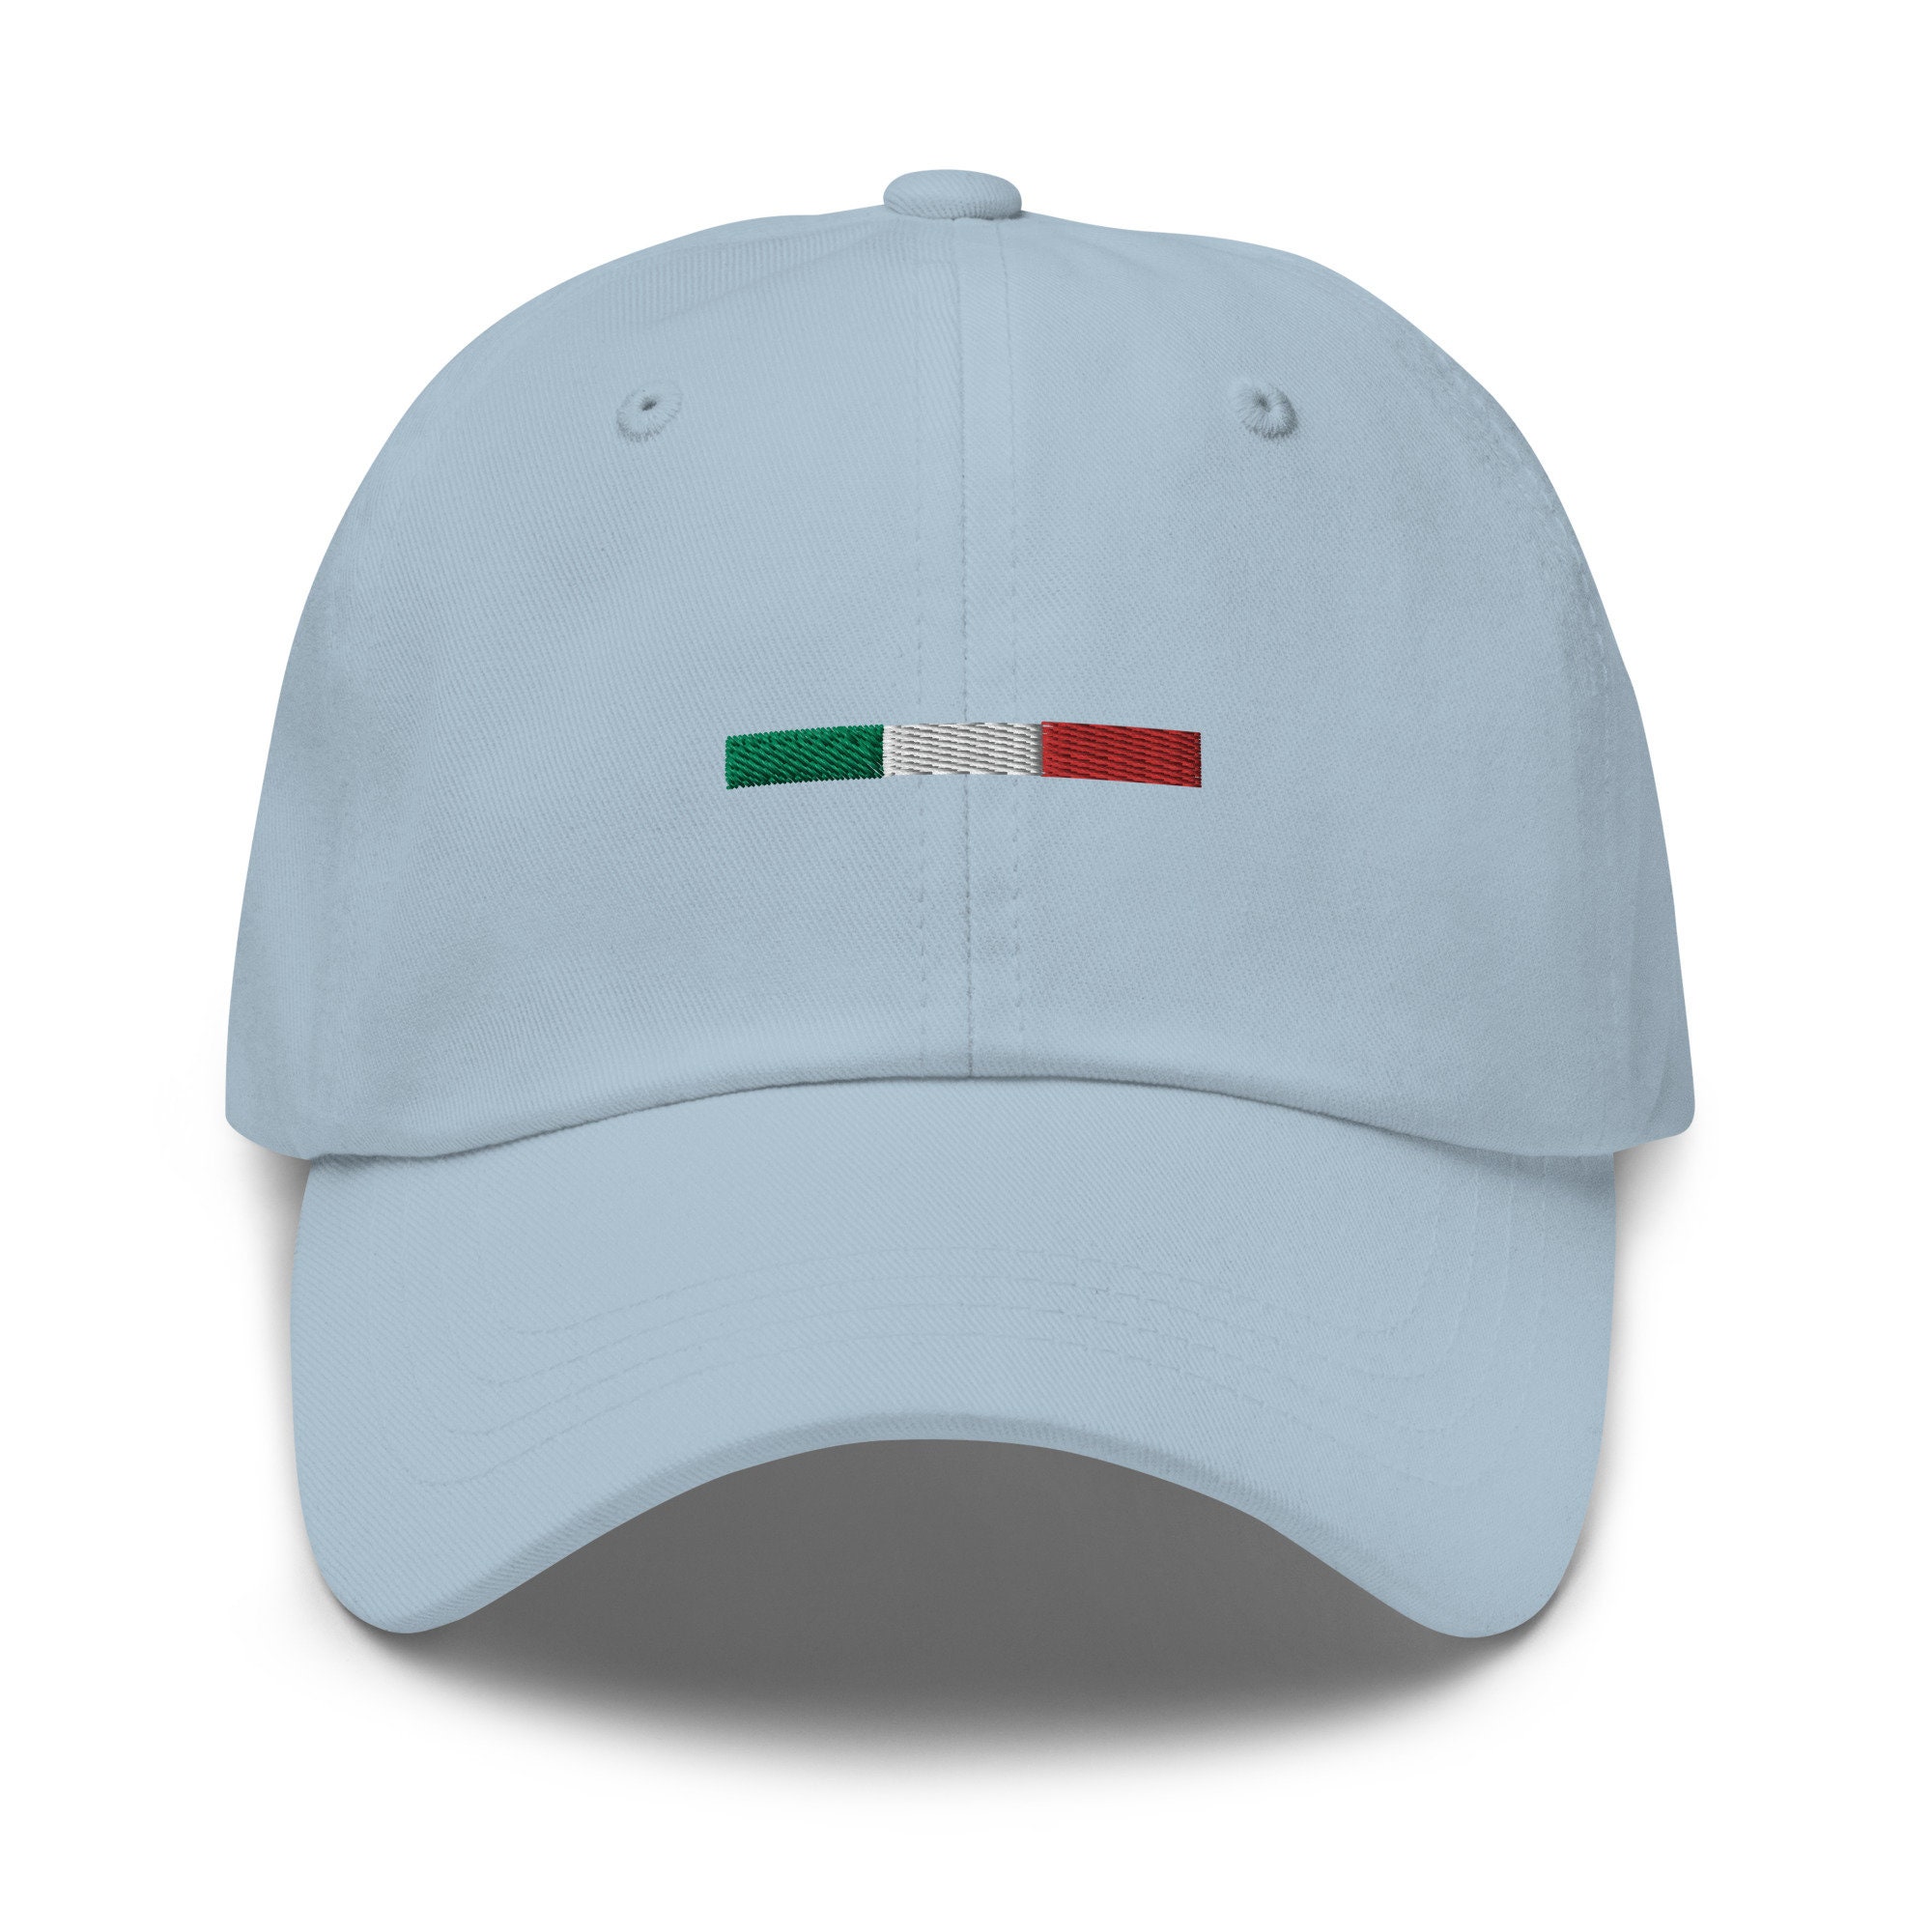 NEW ITALIA ITALY BLUE COUNTRY SHAPE FLAG EMBOSSED HAT CAP . 